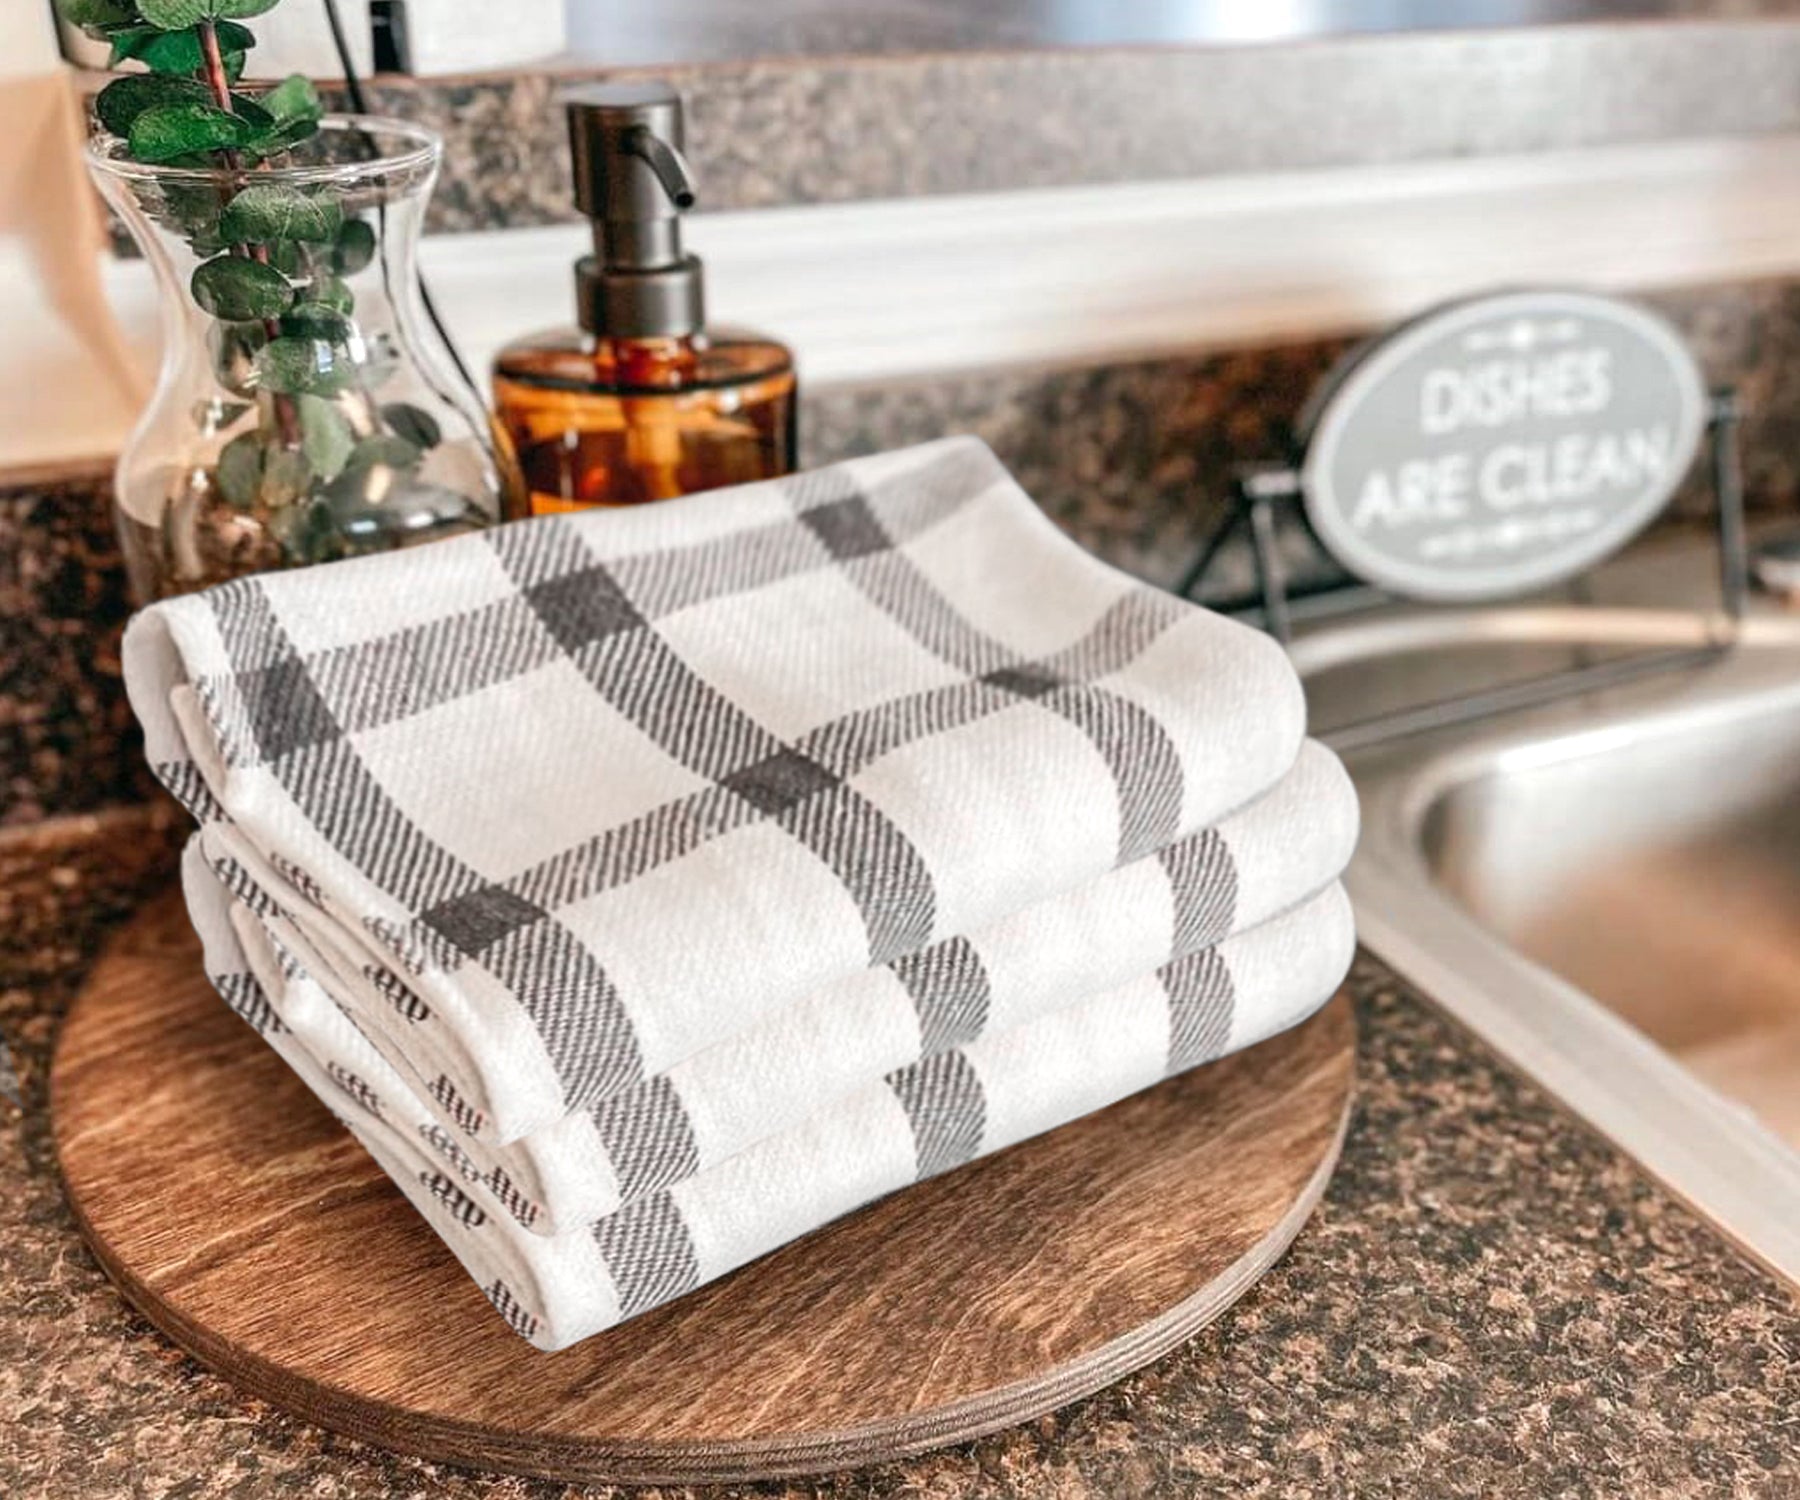 Cotton dish towel resting on a rustic wooden chopping board